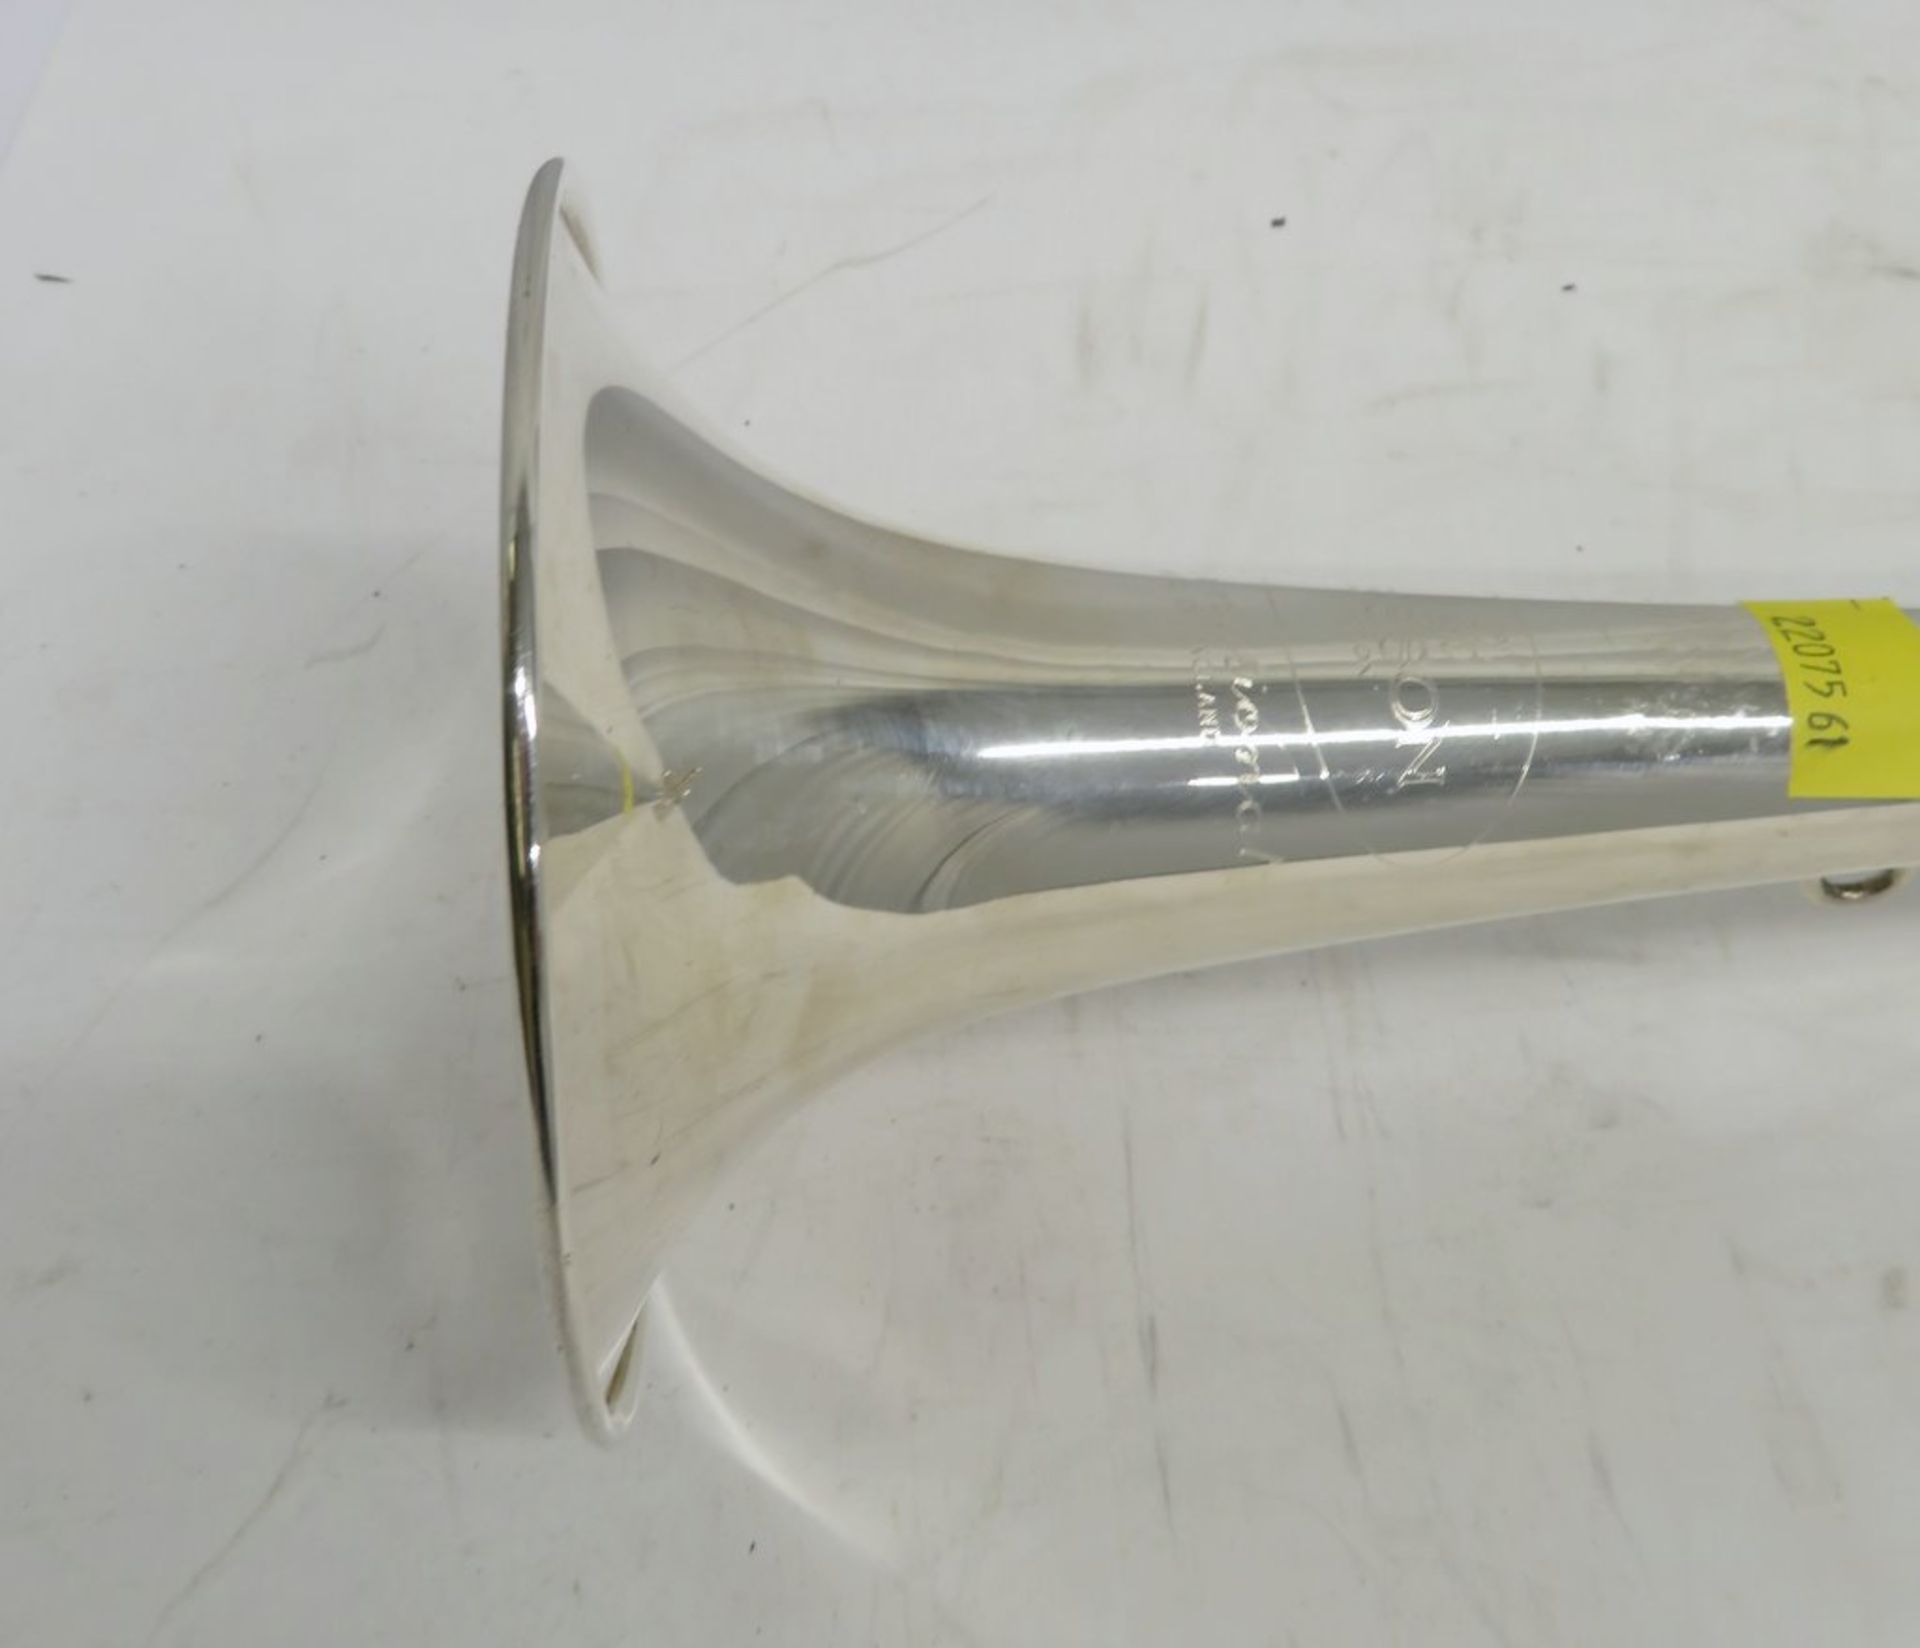 Besson 706 International fanfare trumpet with case. Serial number: 836298. - Image 5 of 14